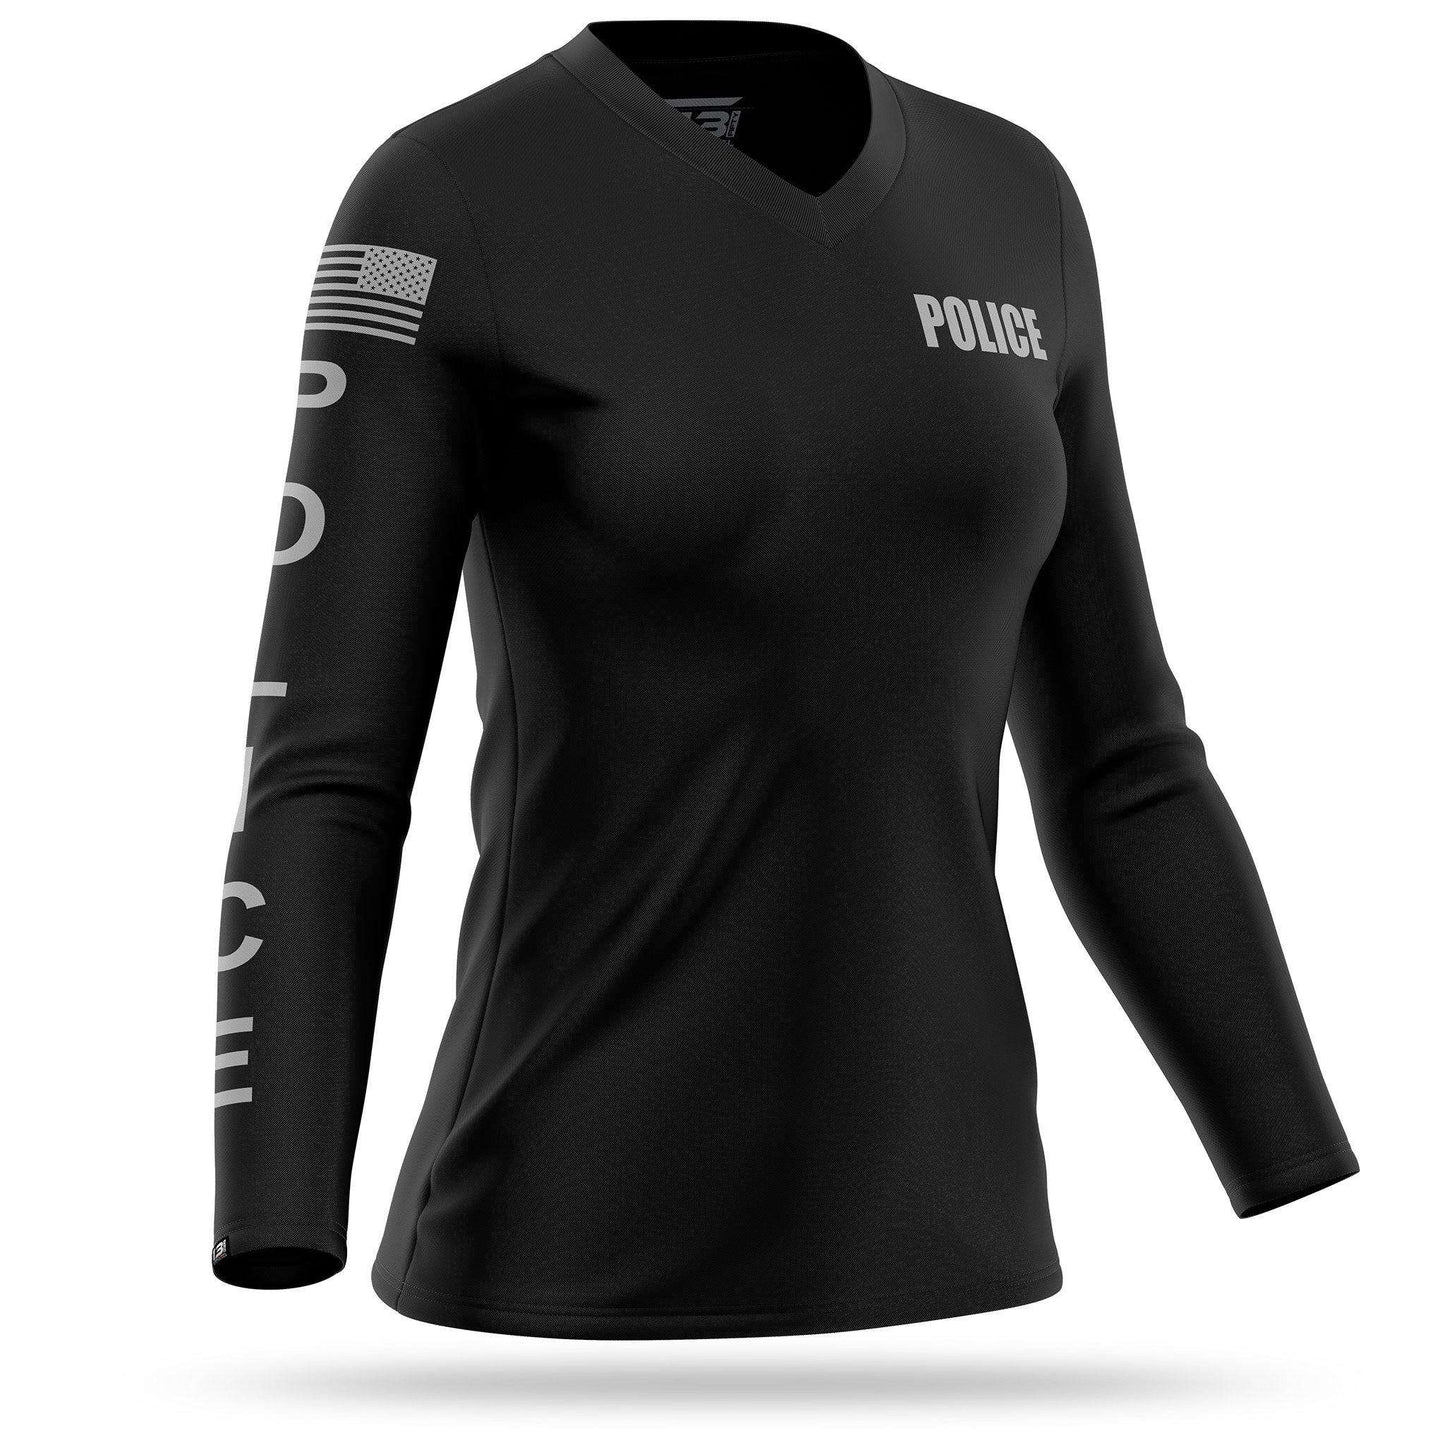 [POLICE] Women's Performance Long Sleeve [BLK/GRY]-13 Fifty Apparel